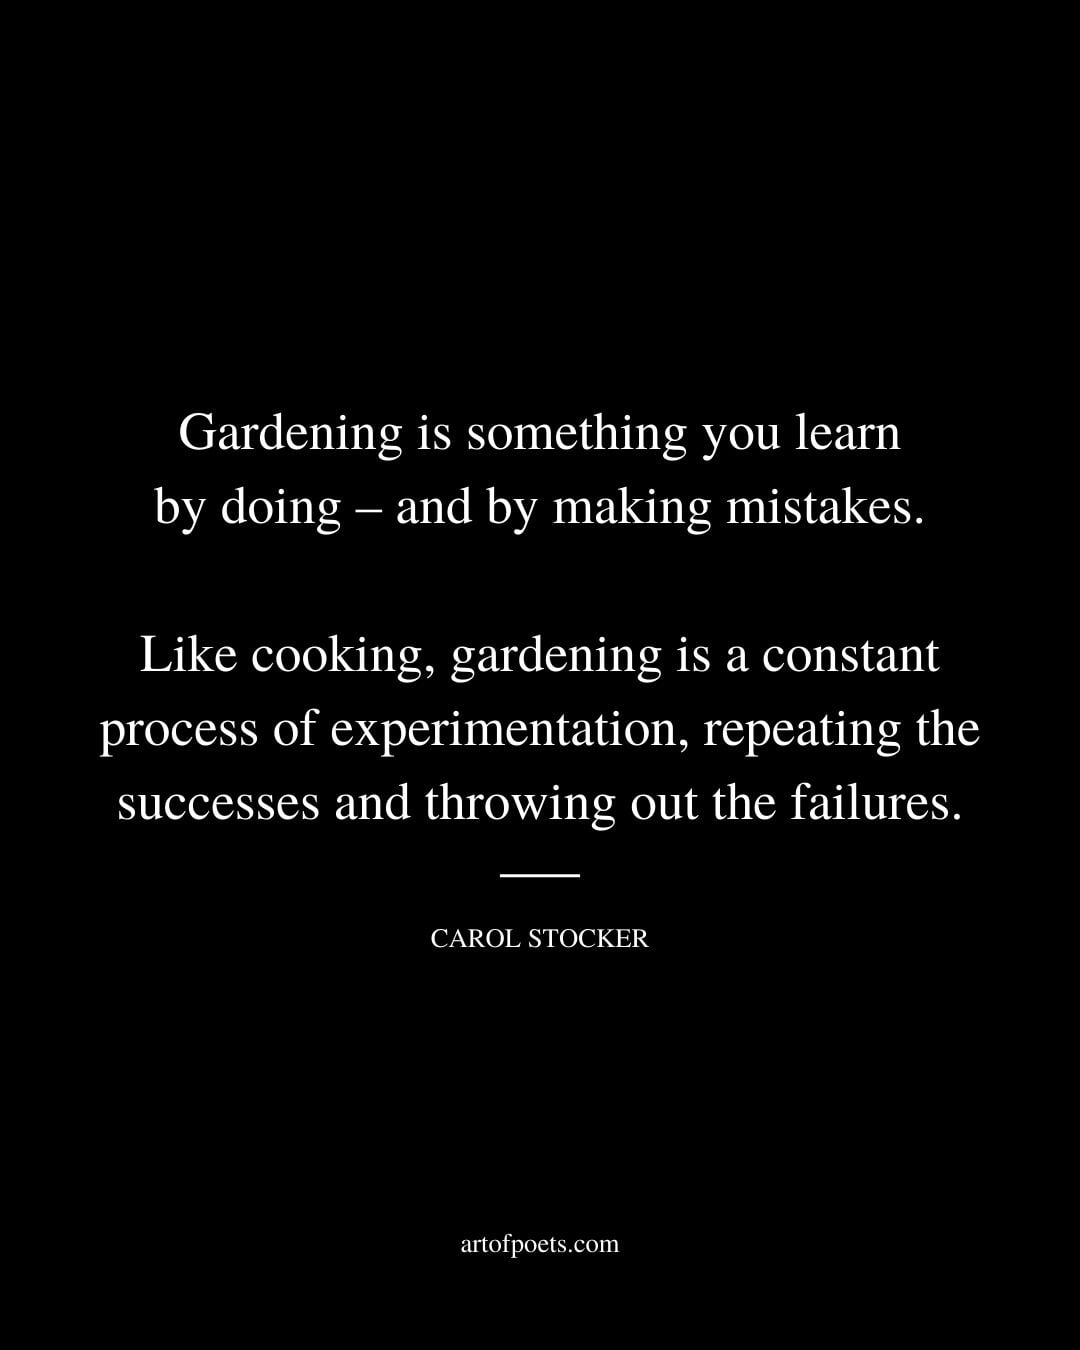 Gardening is something you learn by doing – and by making mistakes…. Like cooking gardening is a constant process of